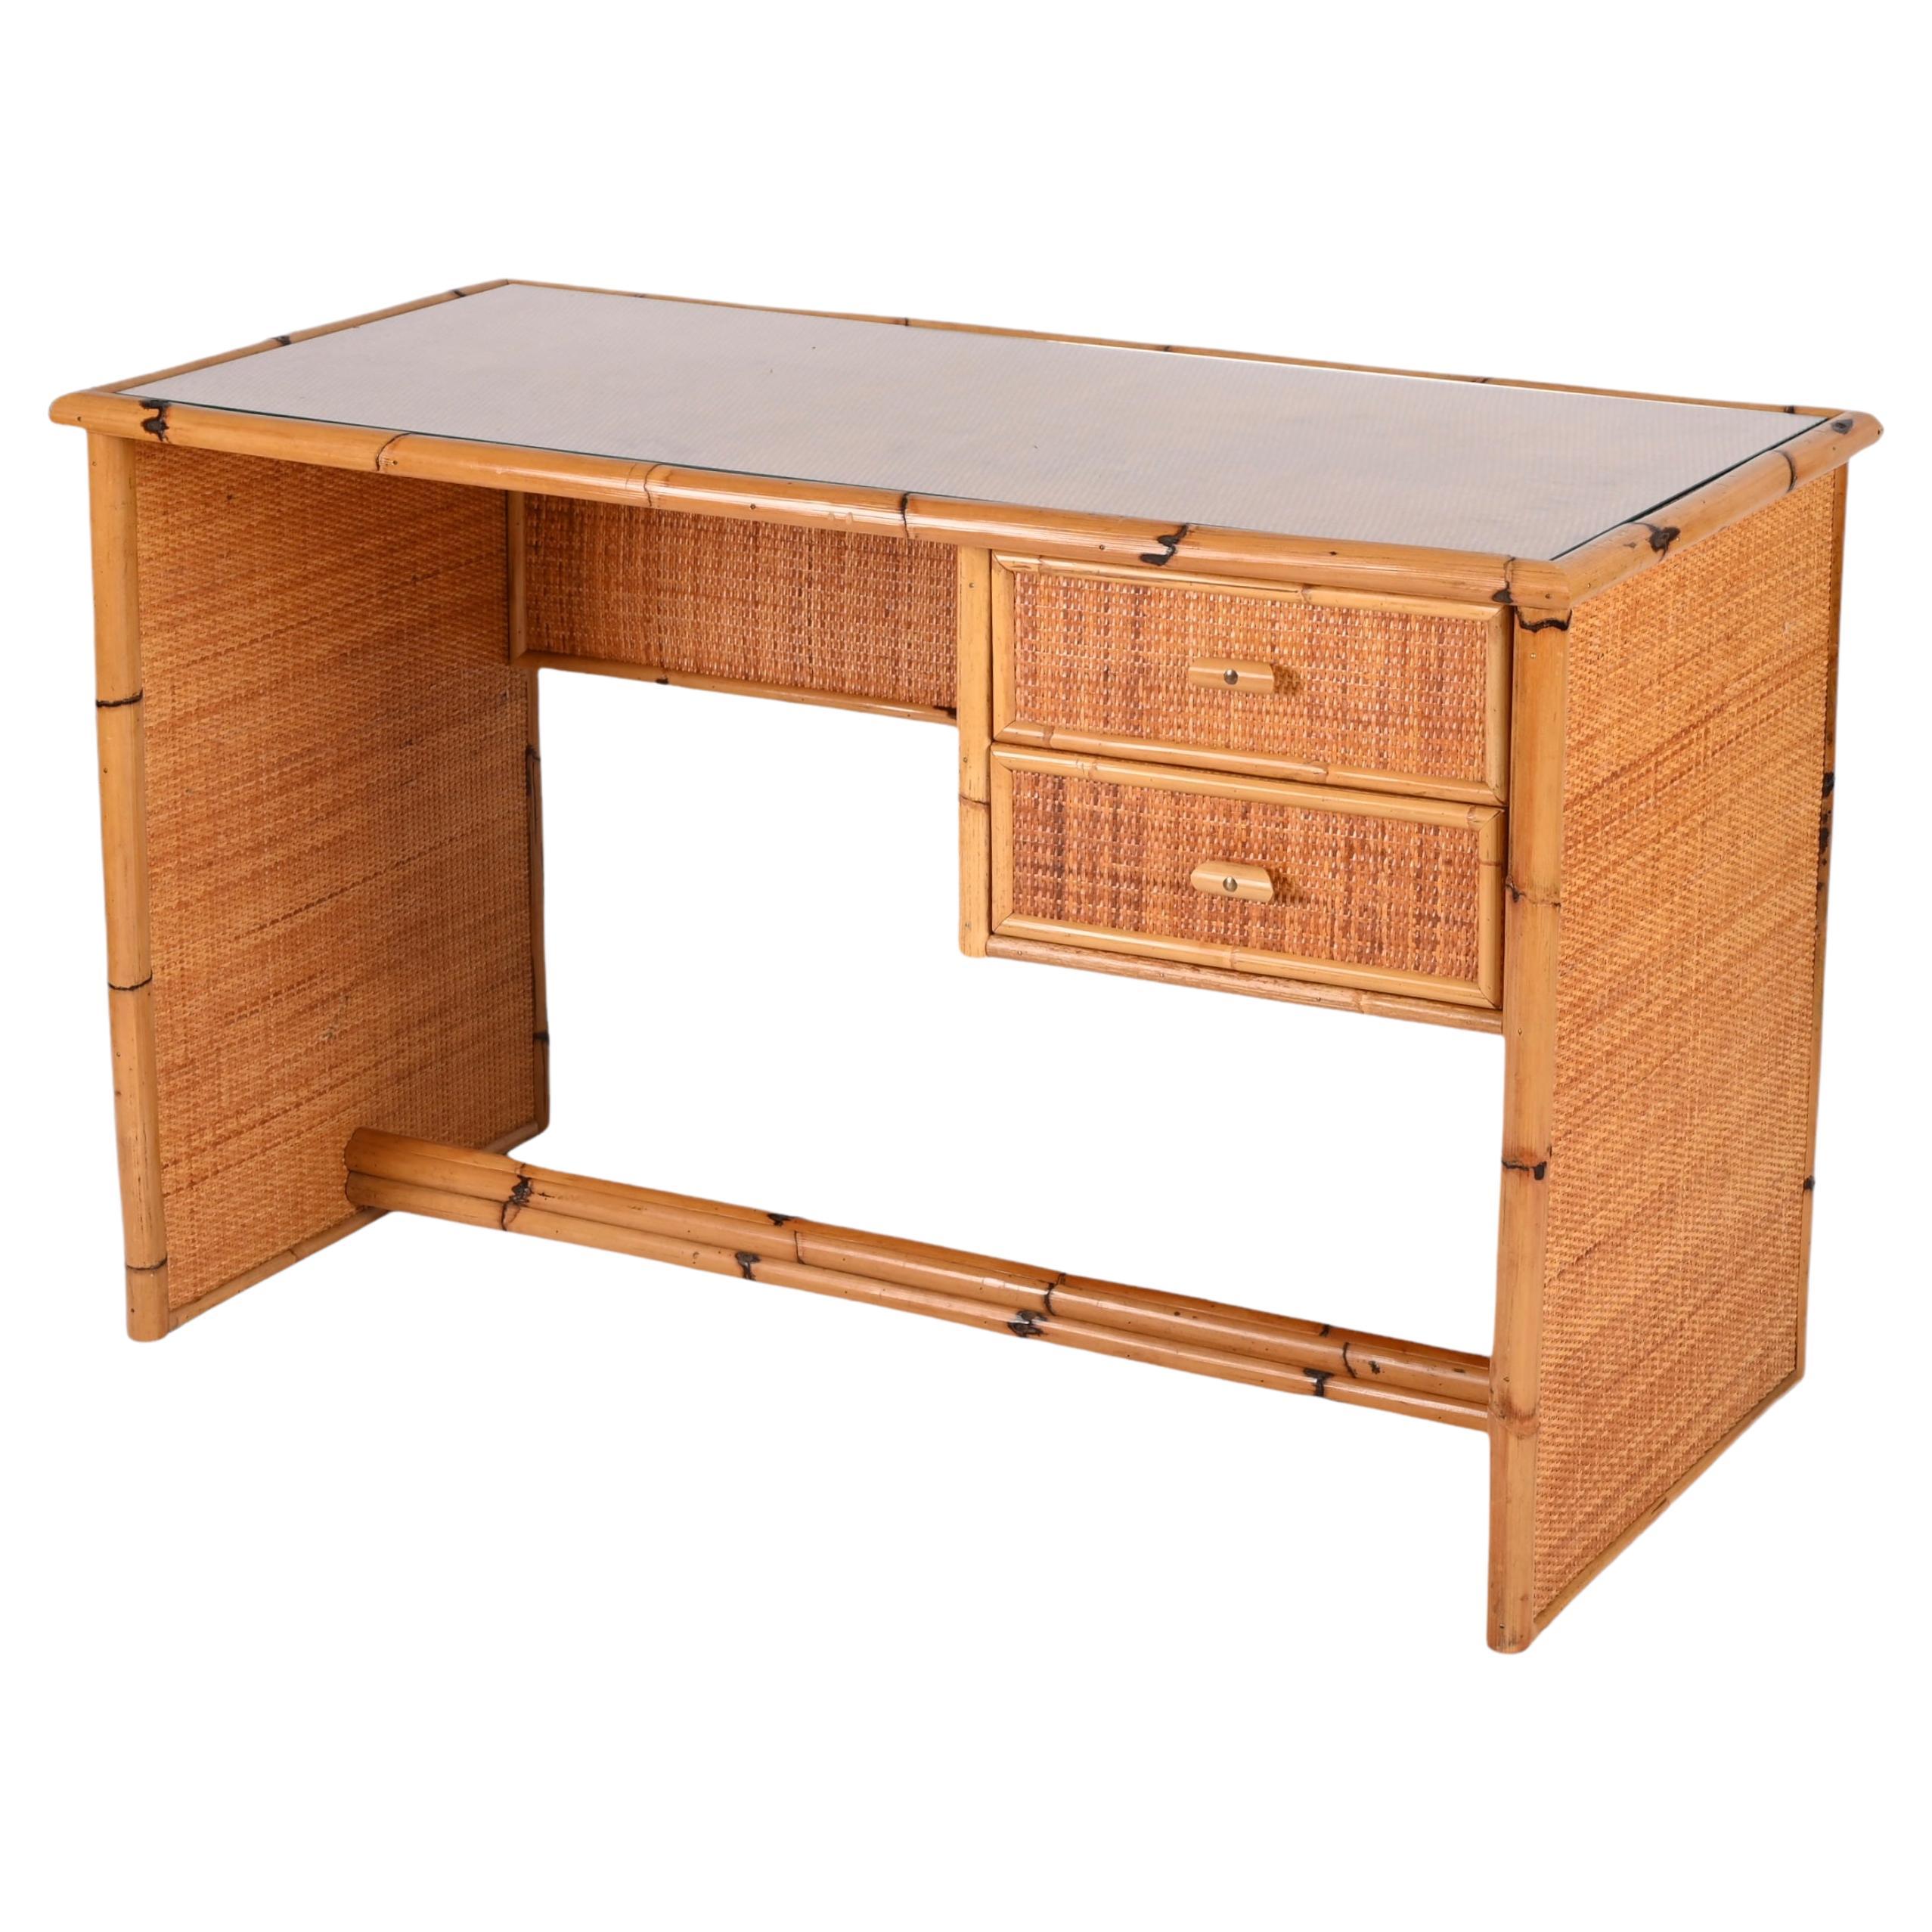 Midcentury Glass Top, Bamboo and Wicker Italian Desk with Drawers, 1980s For Sale